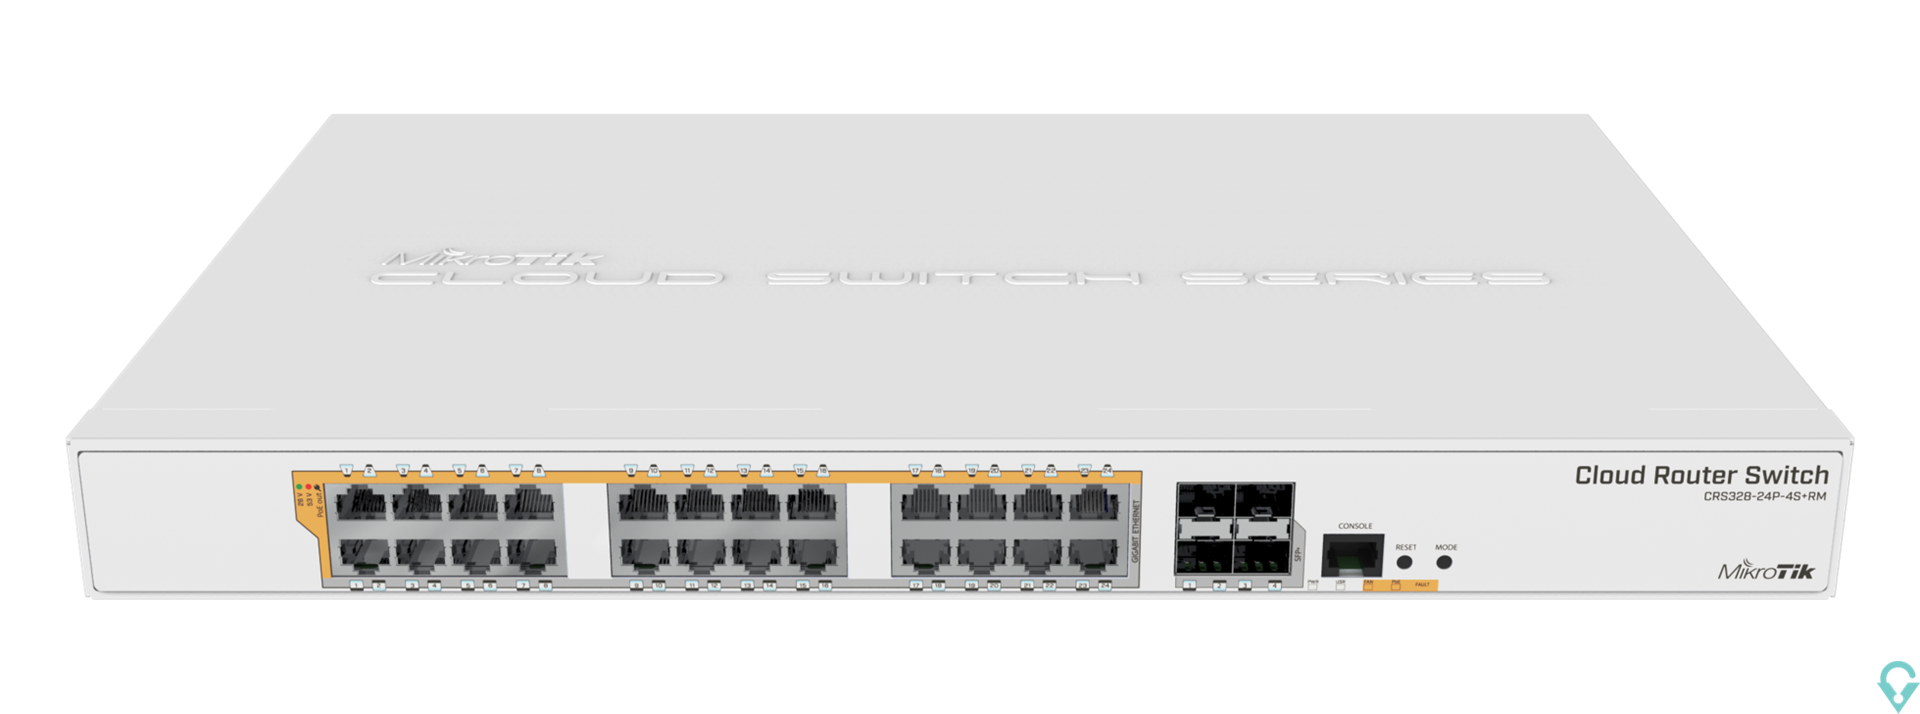 Picture of CRS328-24P-4S+RM Cloud Router Switch 328-24P-4S+RM with 800 MHz CPU, 512MB RAM, 24xGigabit LAN (all PoE-out), 4xSFP+ cages, Rout